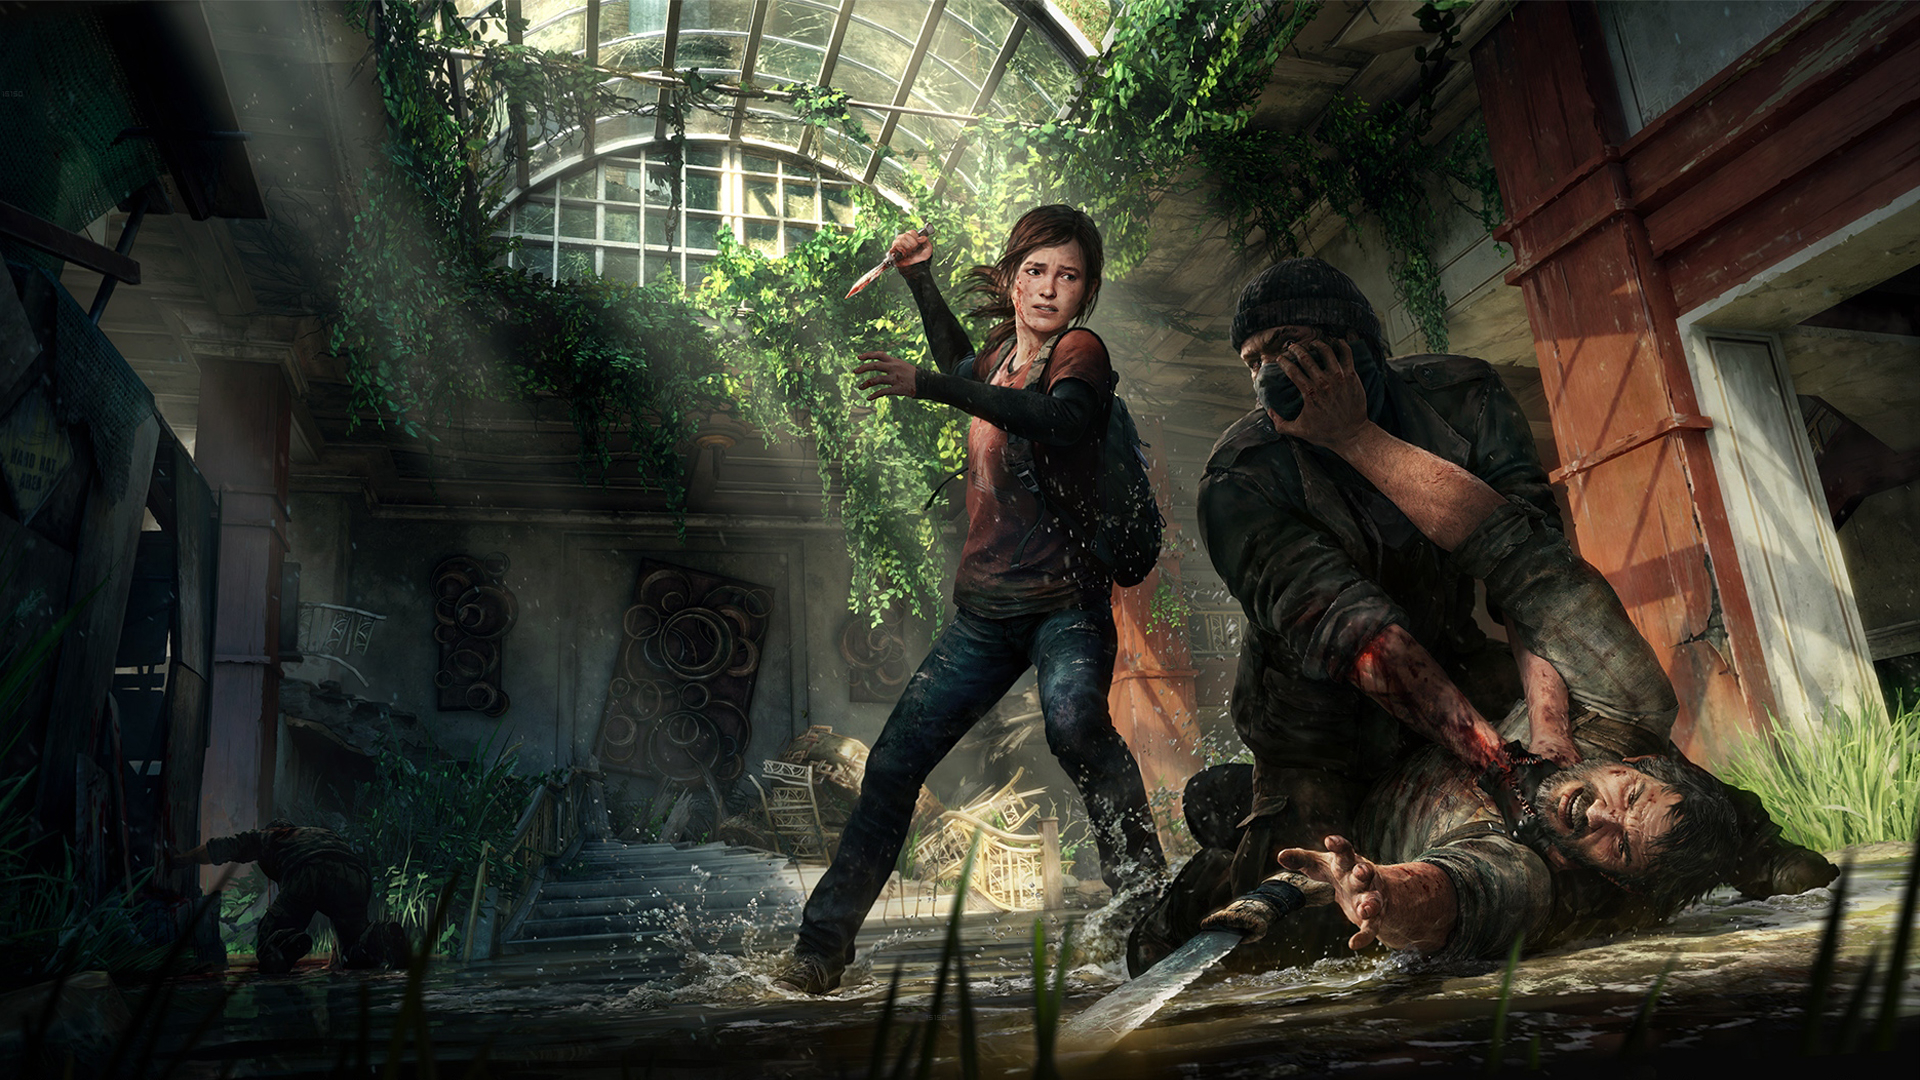 THE LAST OF US FULL PC GAME+TRAINER: THE LAST OF US FULL PC GAME+ TRAINER